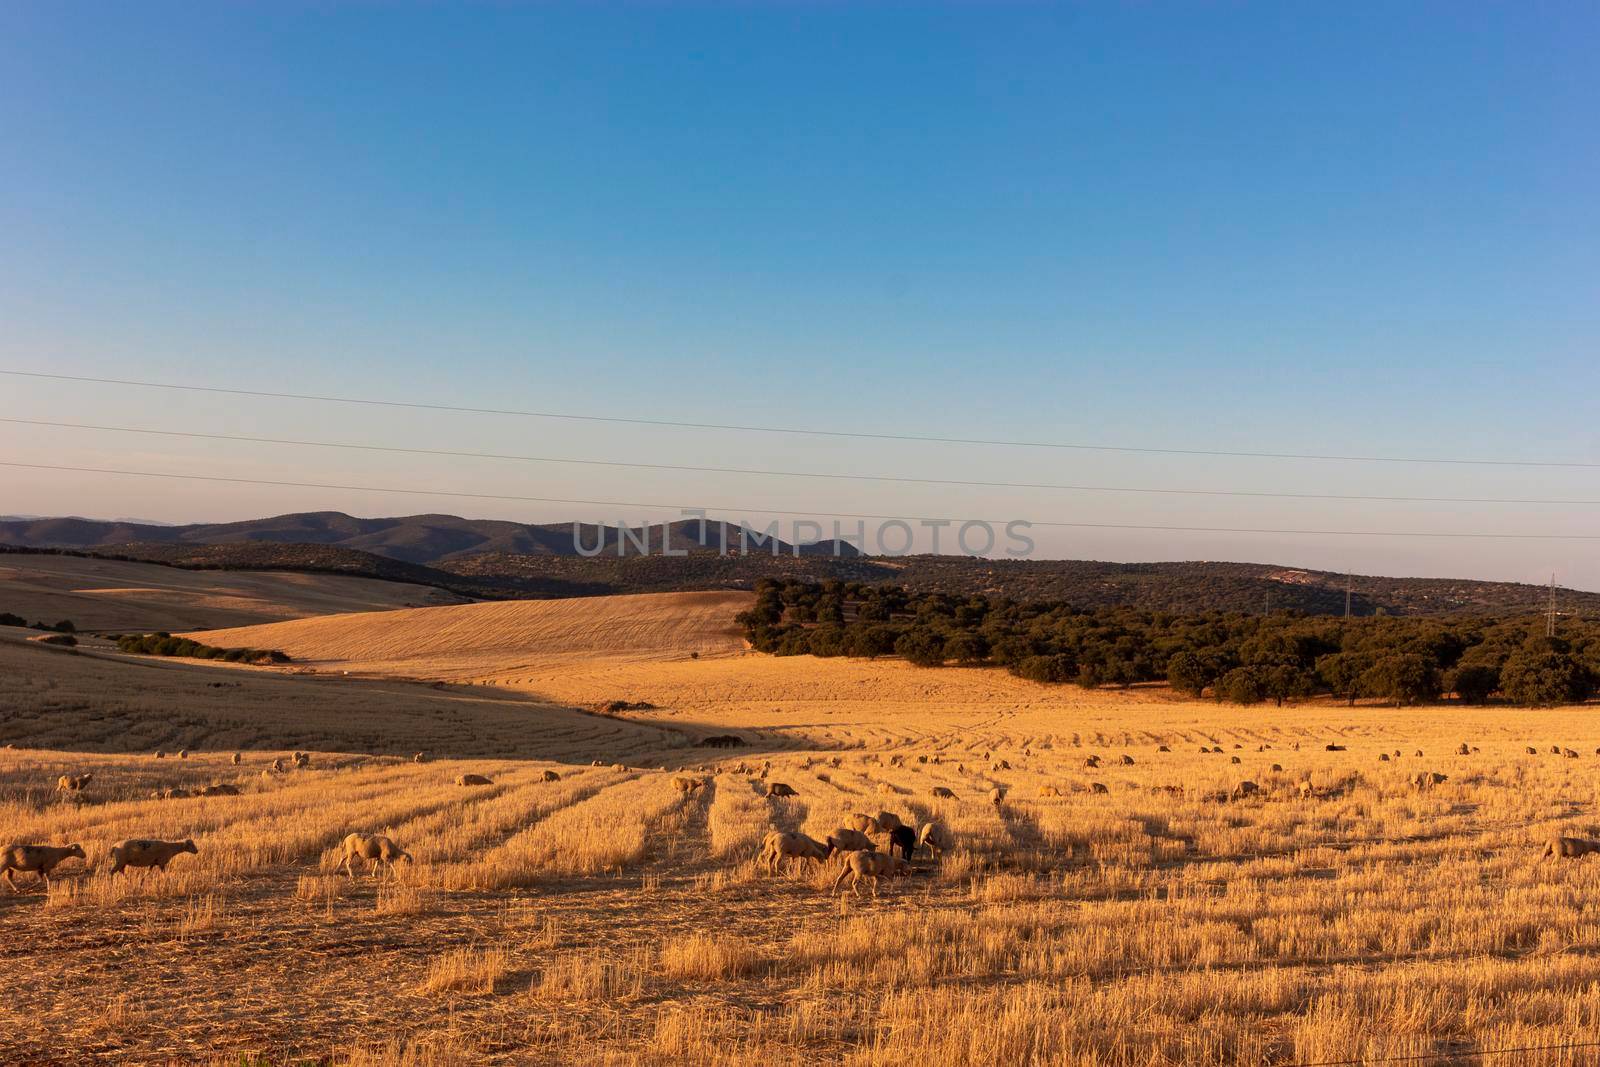 Sheep grazing in a wheat field of a village in Andalusia by loopneo